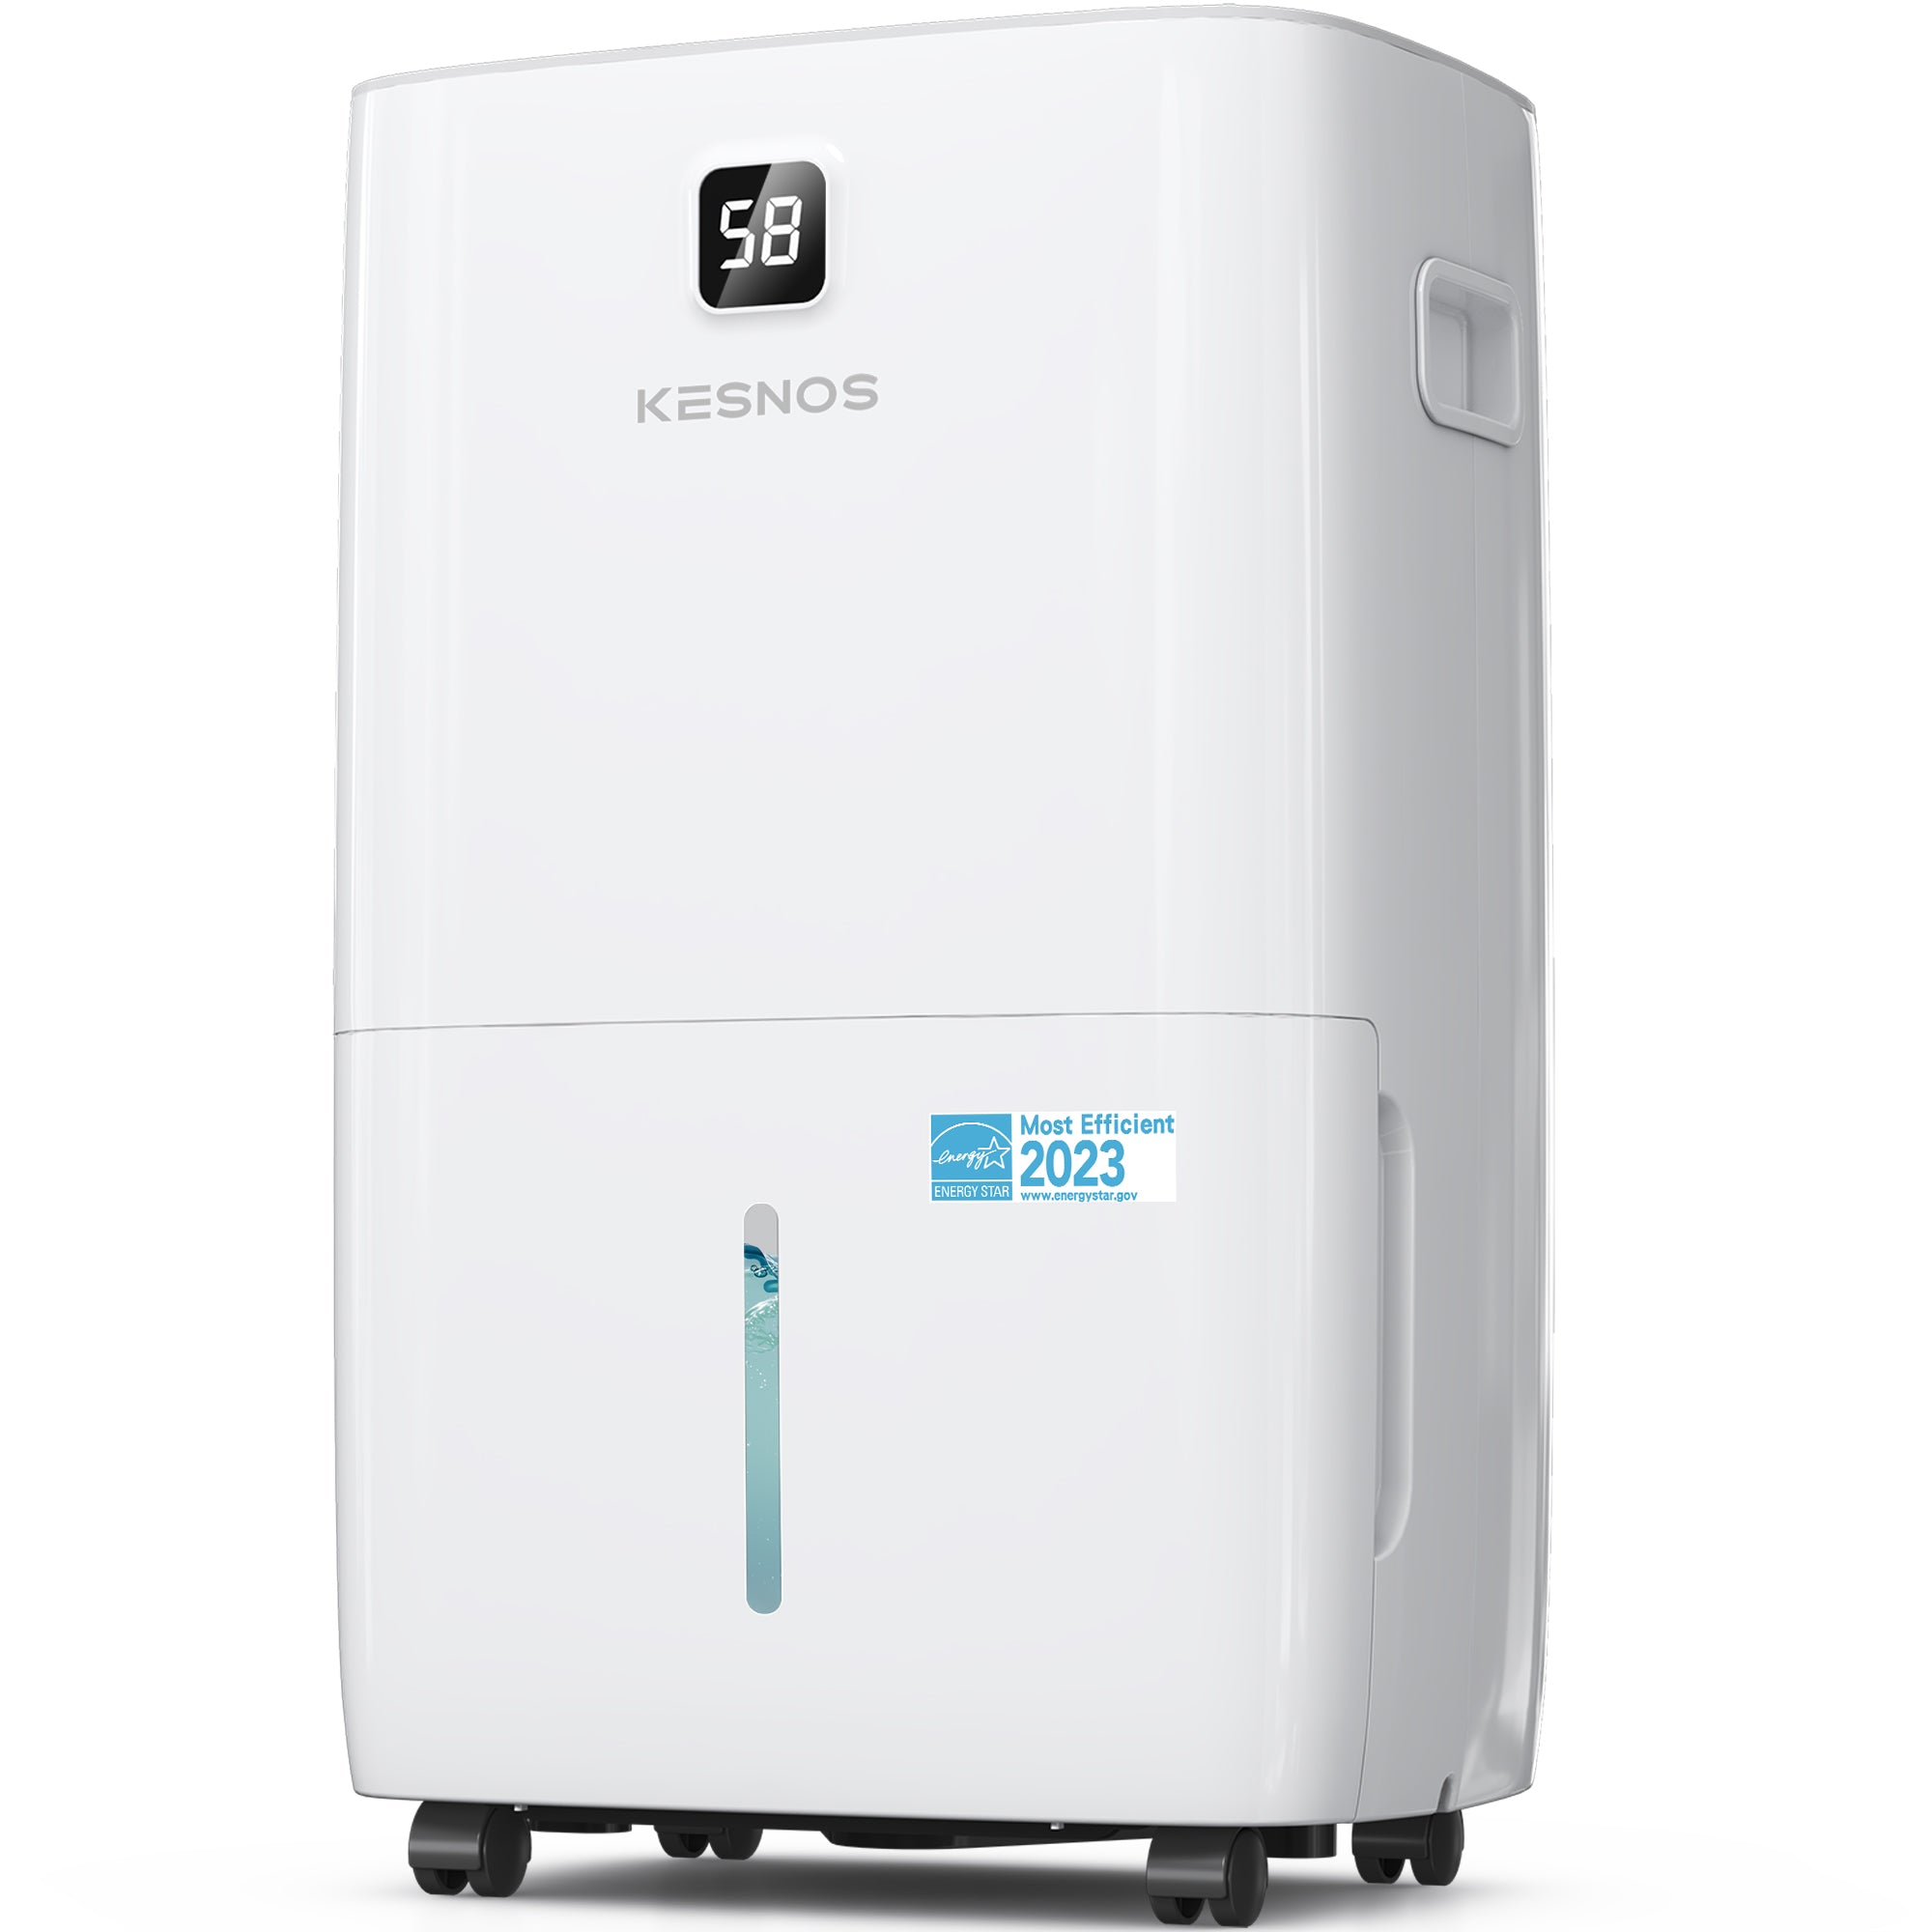 Kesnos 150 Pints Home Dehumidifier Energy Star Most Efficient 2023 for Space Up to 7500 Sq. Ft - Dehumidifier with Drain Hose for Basement, Home, Bathroom - Dehumidifier with Front Display(Model: JD026N-150)